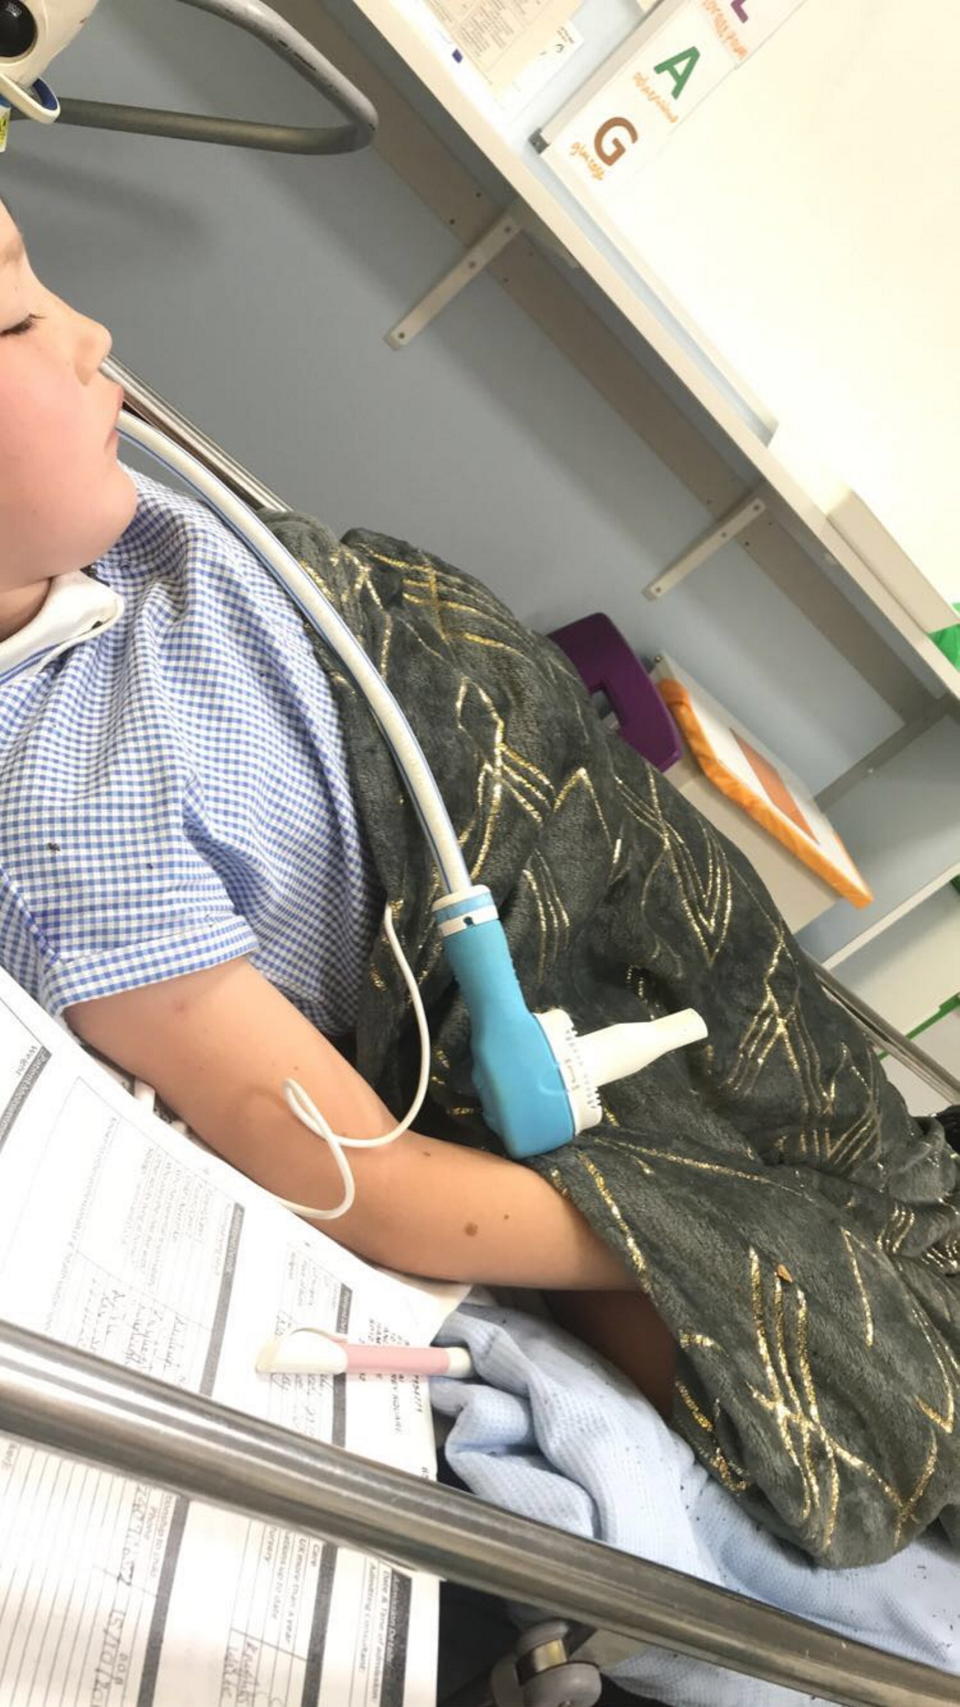 Pictured: Elliemai Smith in hospital after the hit-and-run by an e-scooter rider.

An eight year old girl suffered concussion and a broken leg when a hit-and-run e-scooter rider ploughed into her on a footpath at 'over 20mph'.  Elliemai Smith was sent flying as the scooter smashed into her before the man riding it sped off, leaving her crying on the ground.

She was then rushed to hospital in an ambulance.  Police are now hunting the illegal rider and Elliemai's mother, 28 year old Kayleigh McColl, has appealed for anyone who recognises his description to come forward.  SEE OUR COPY FOR DETAILS.

Please byline: Family/Solent News

© Family/Solent News & Photo Agency
UK +44 (0) 2380 458800
 *** Local Caption *** Submitted to us by mum Kayleigh McColl,

07740906872
kayleighlouisepennie@gmail.com